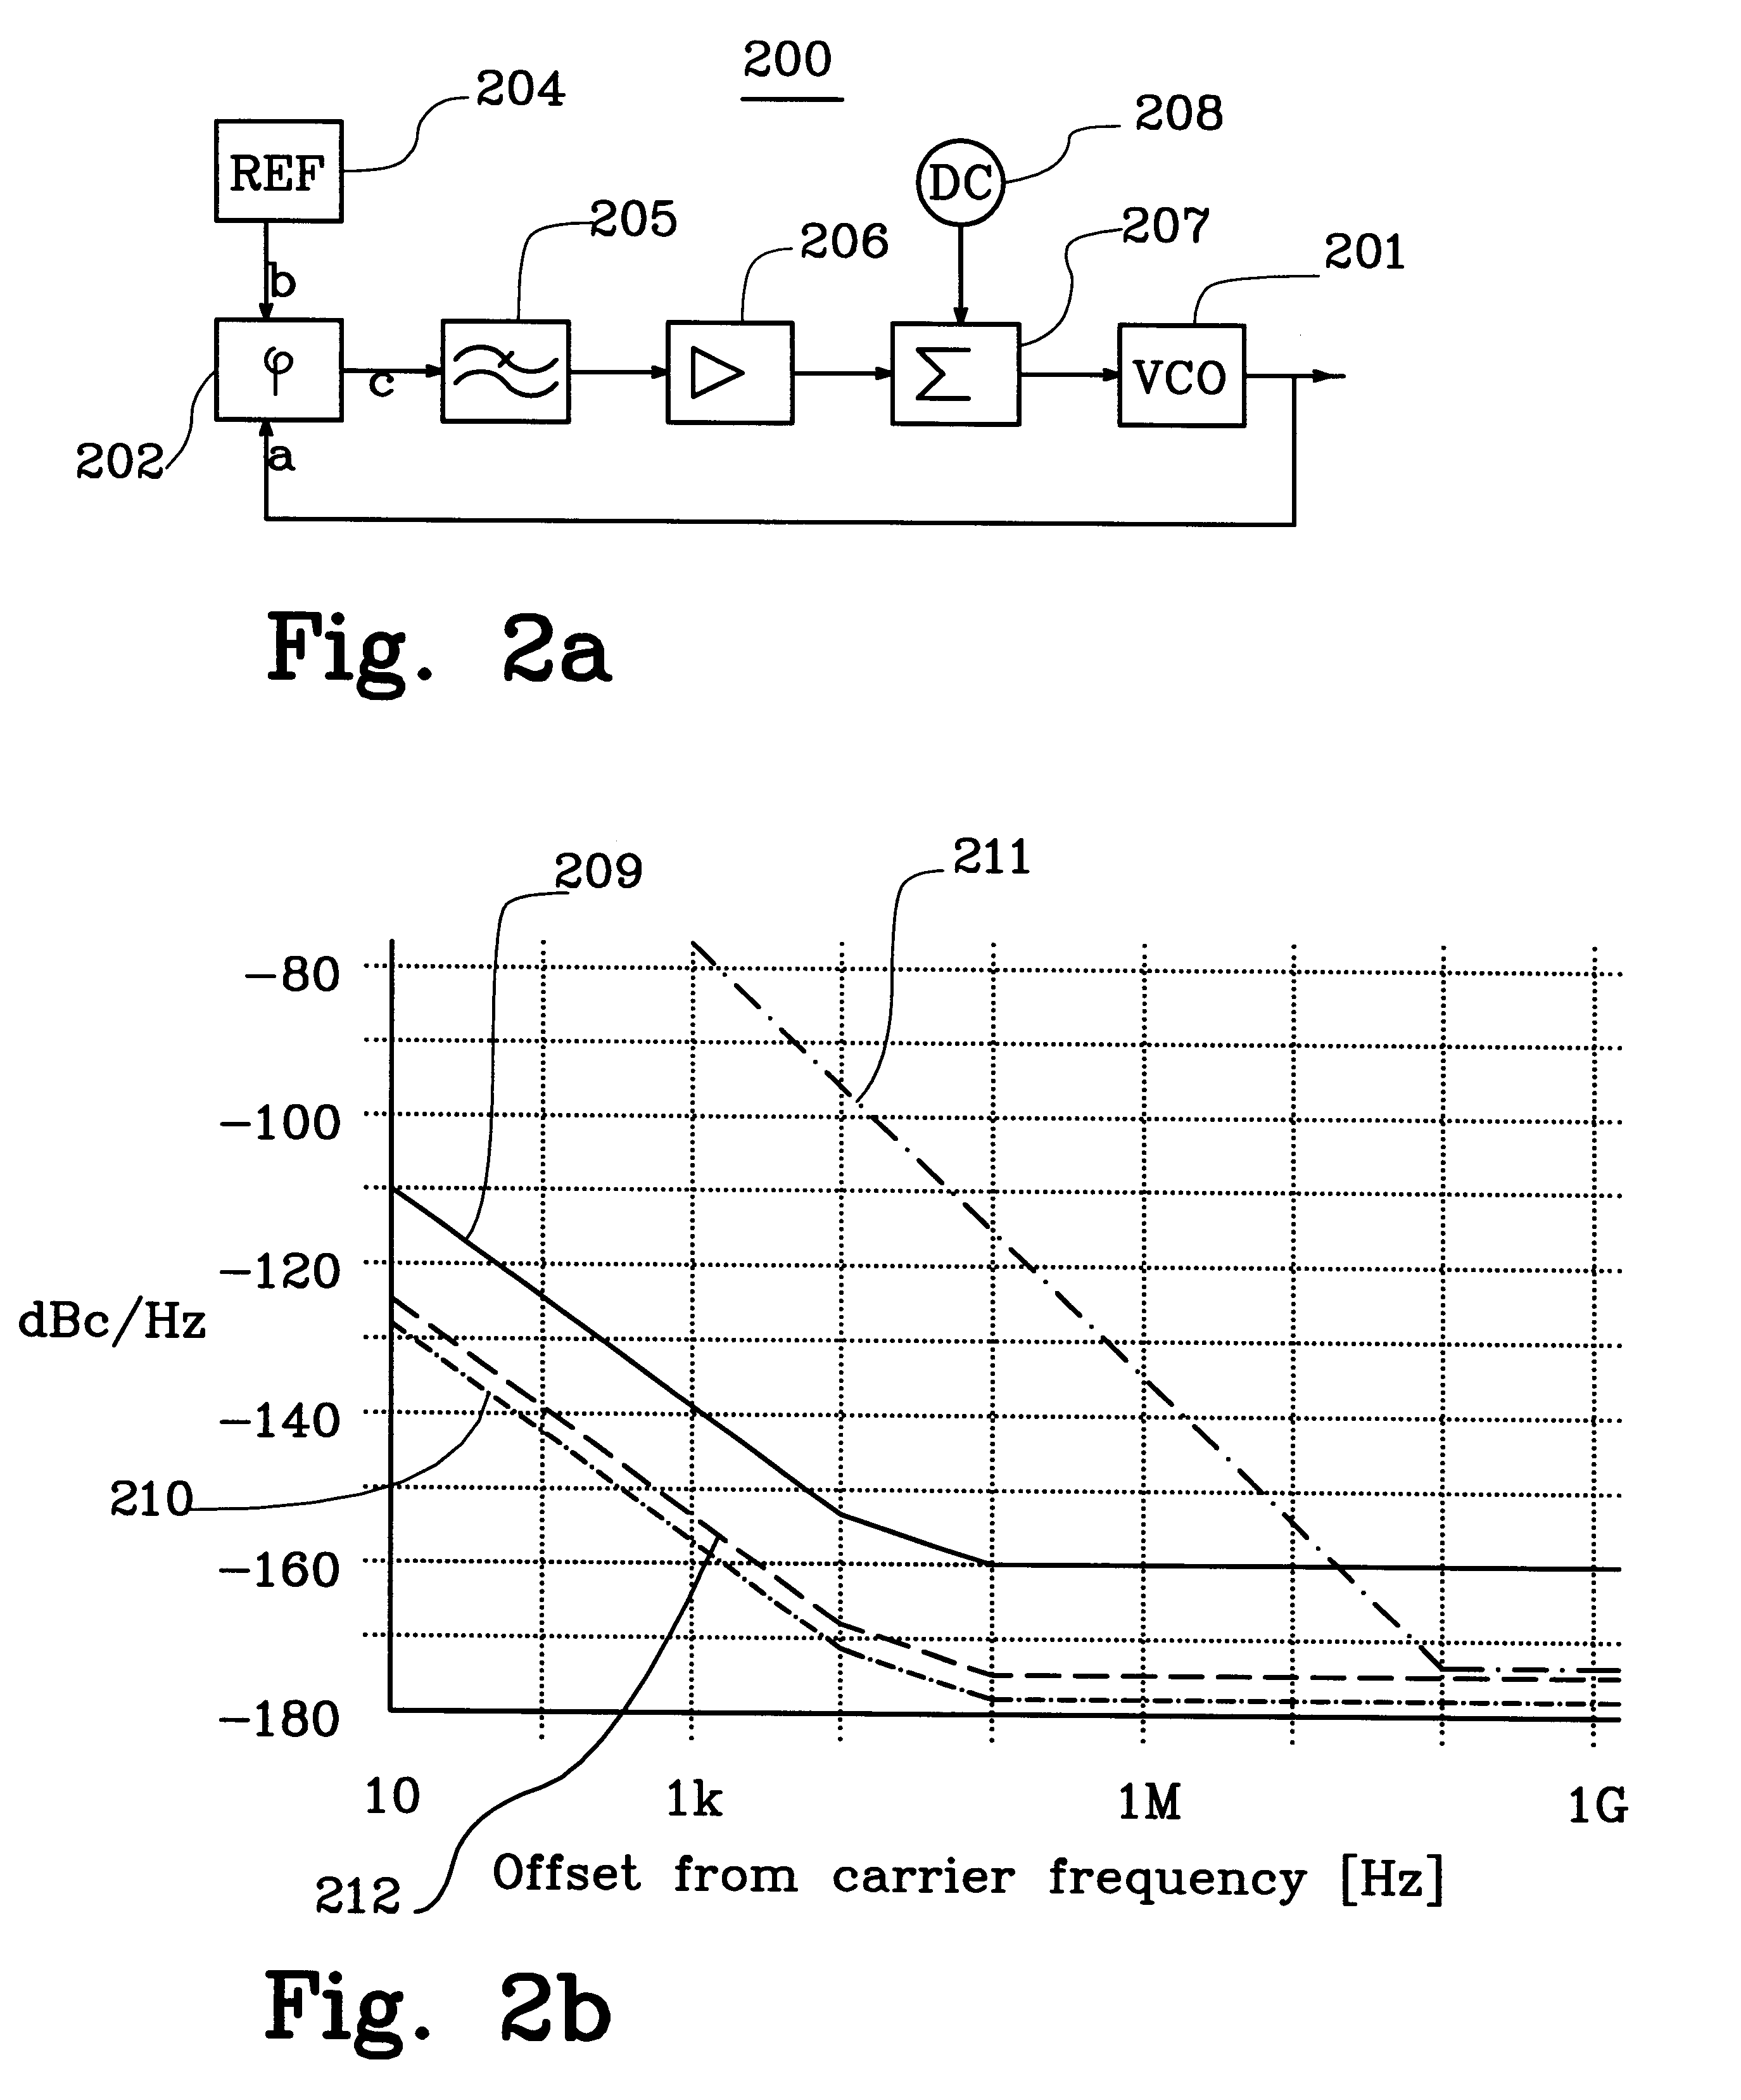 Phase locked loop arrangement in which VCO frequency is a fraction of reference frequency